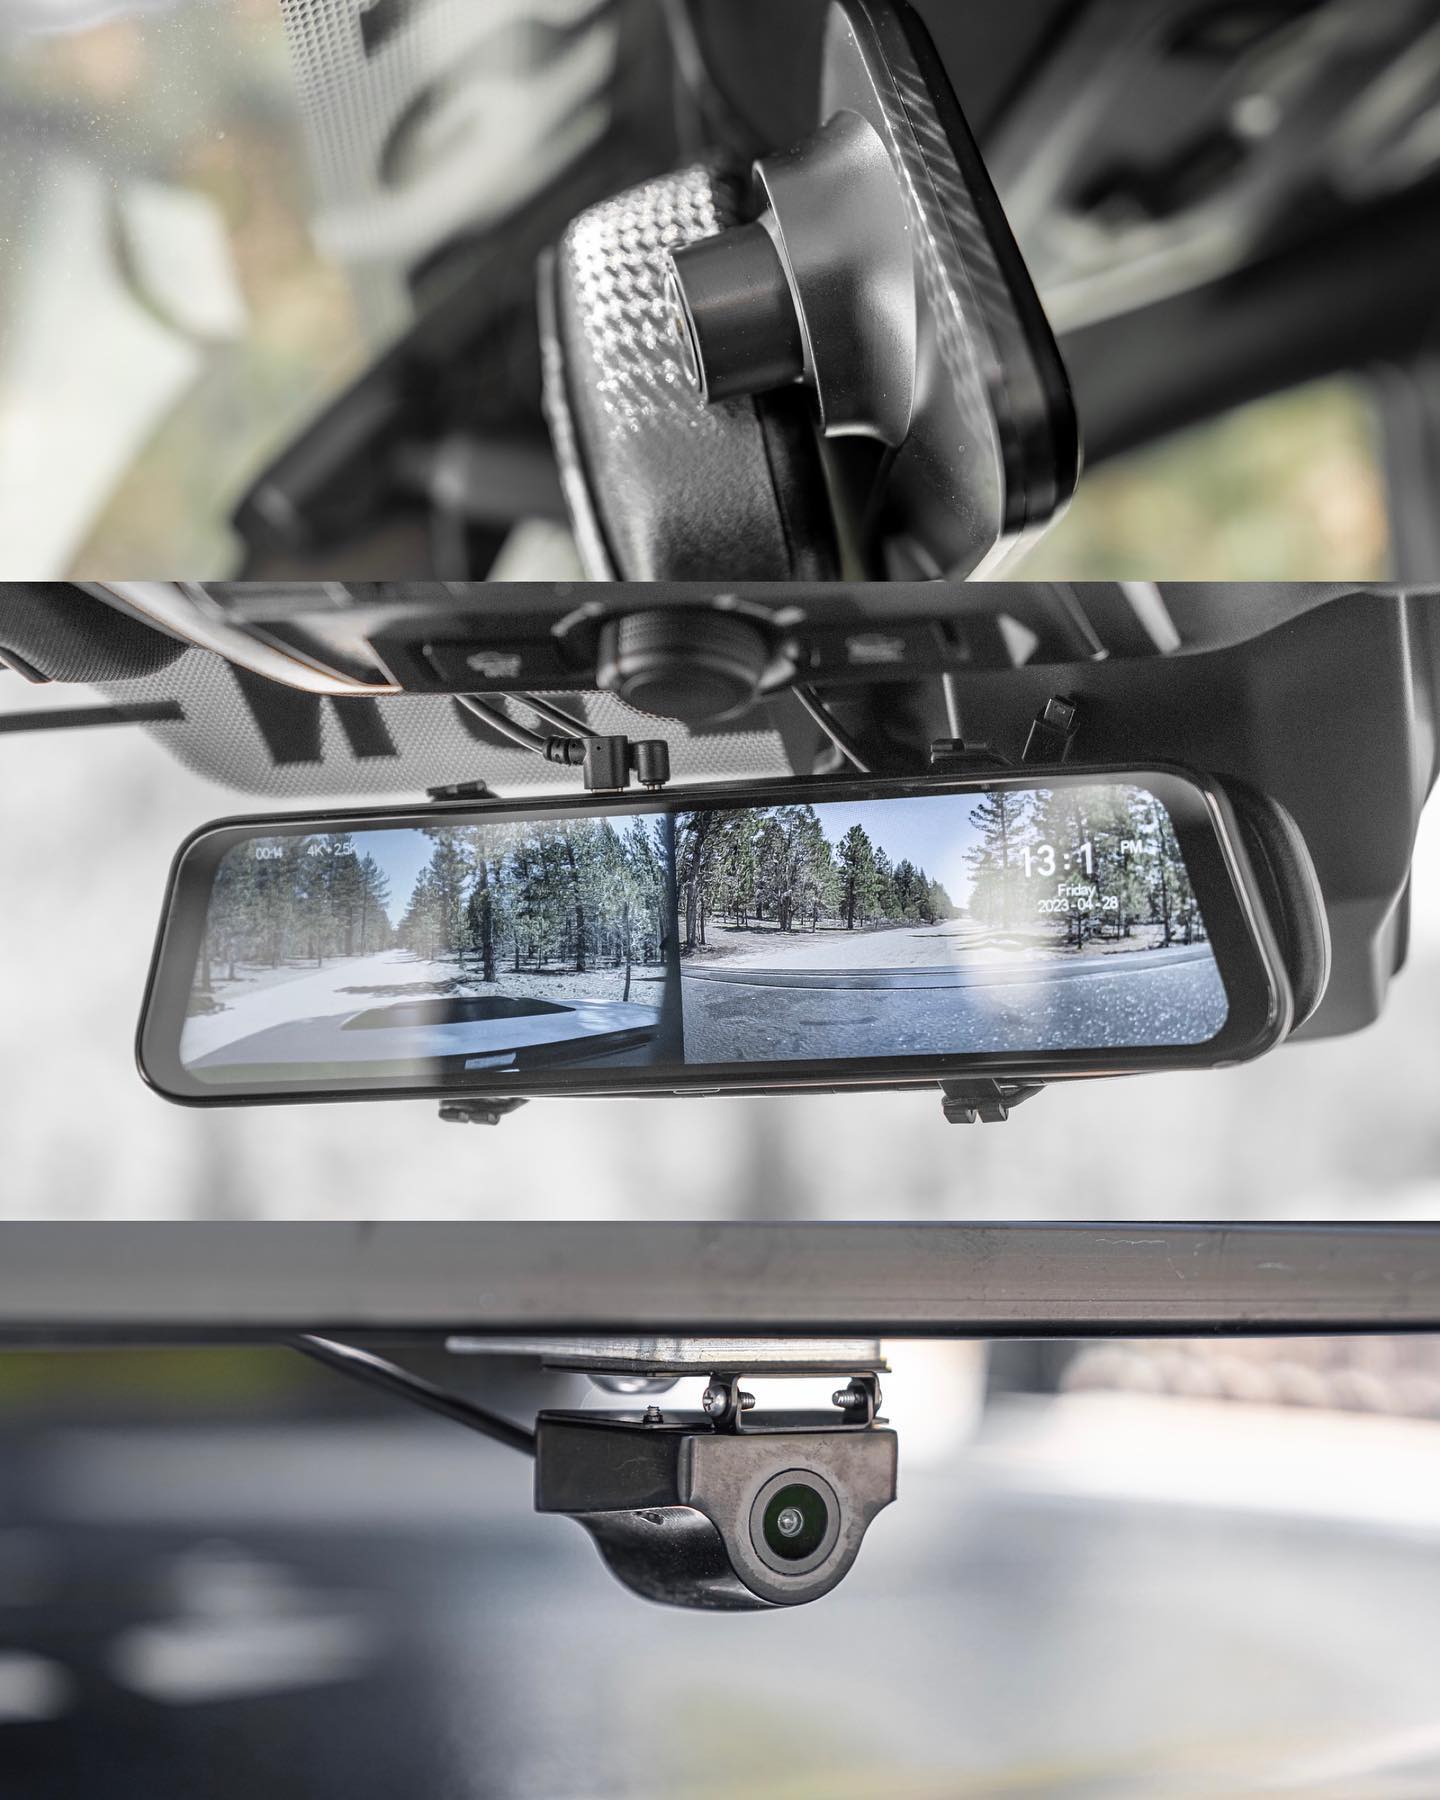 4 Channels Surround View Dashcam, Front + rear + left + right side